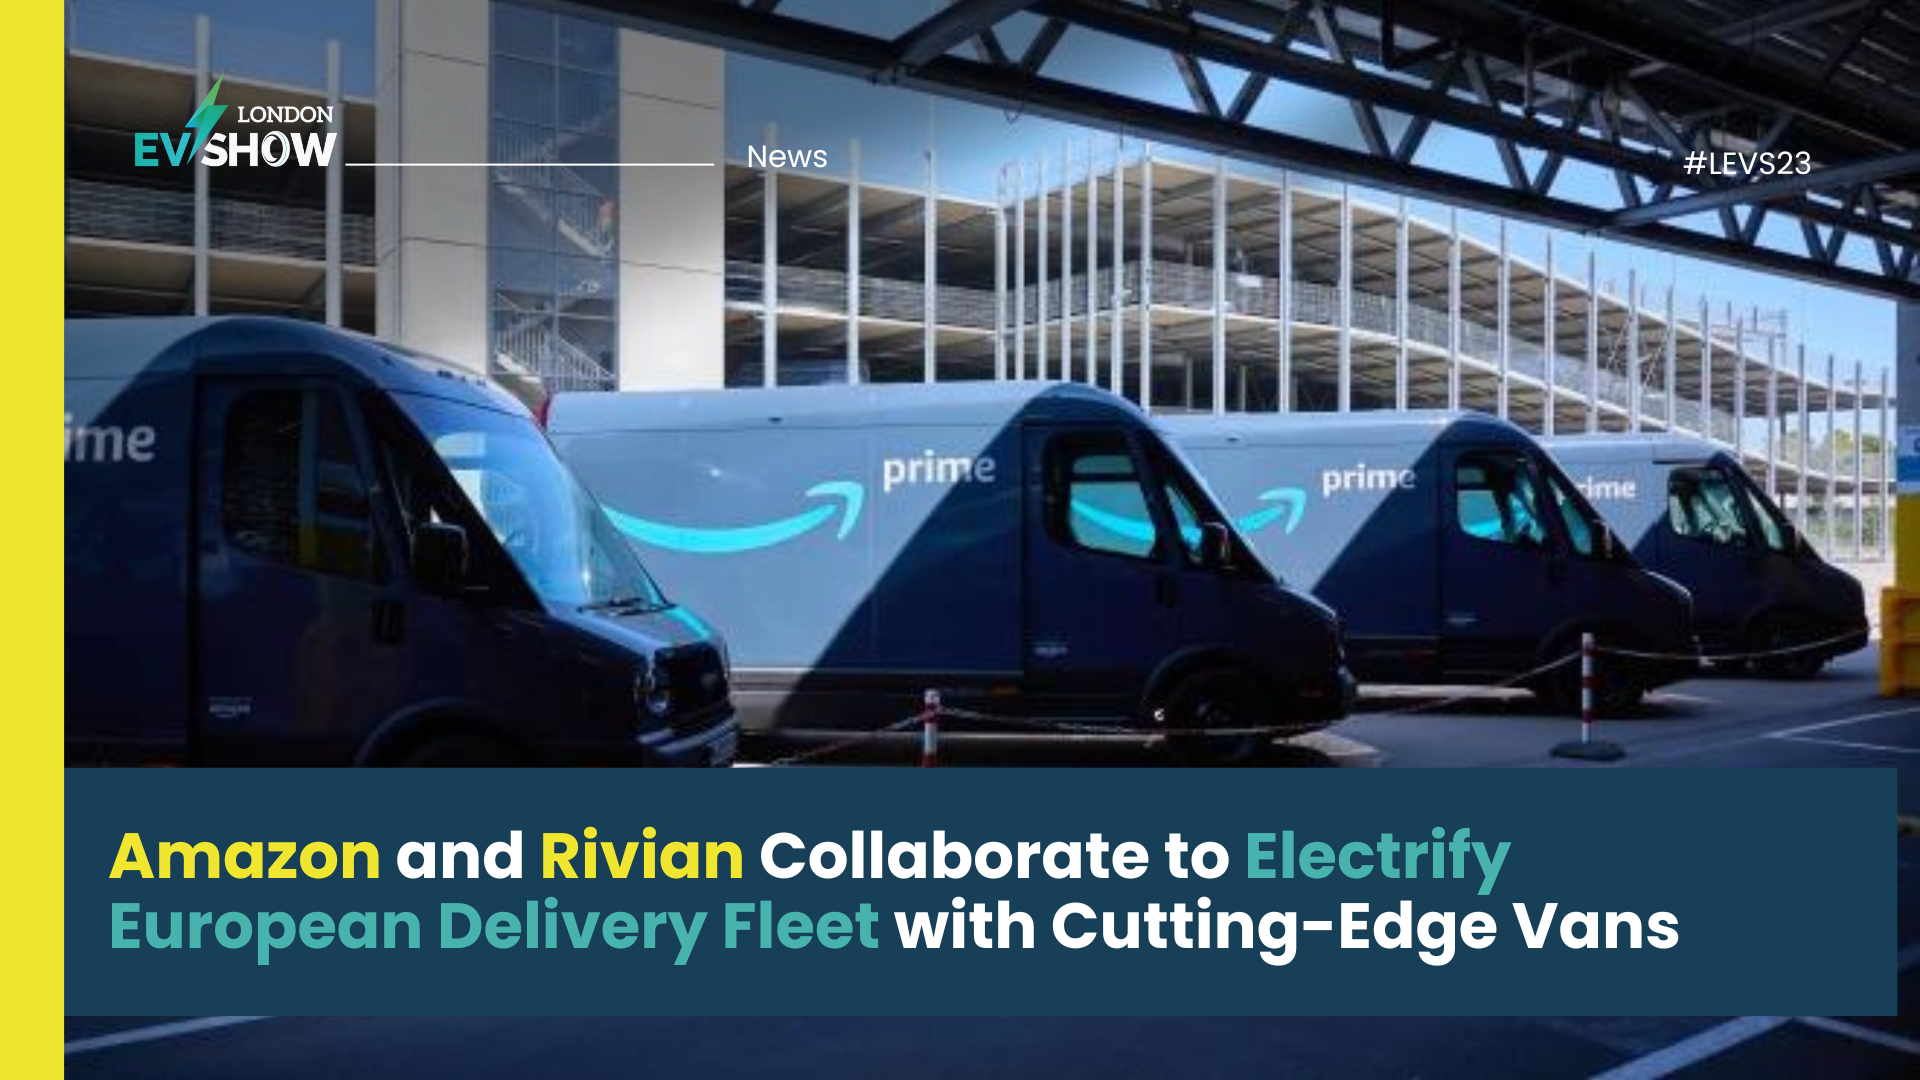 Amazon and Rivian Collaborate to Electrify European Delivery Fleet with Cutting-Edge Vans